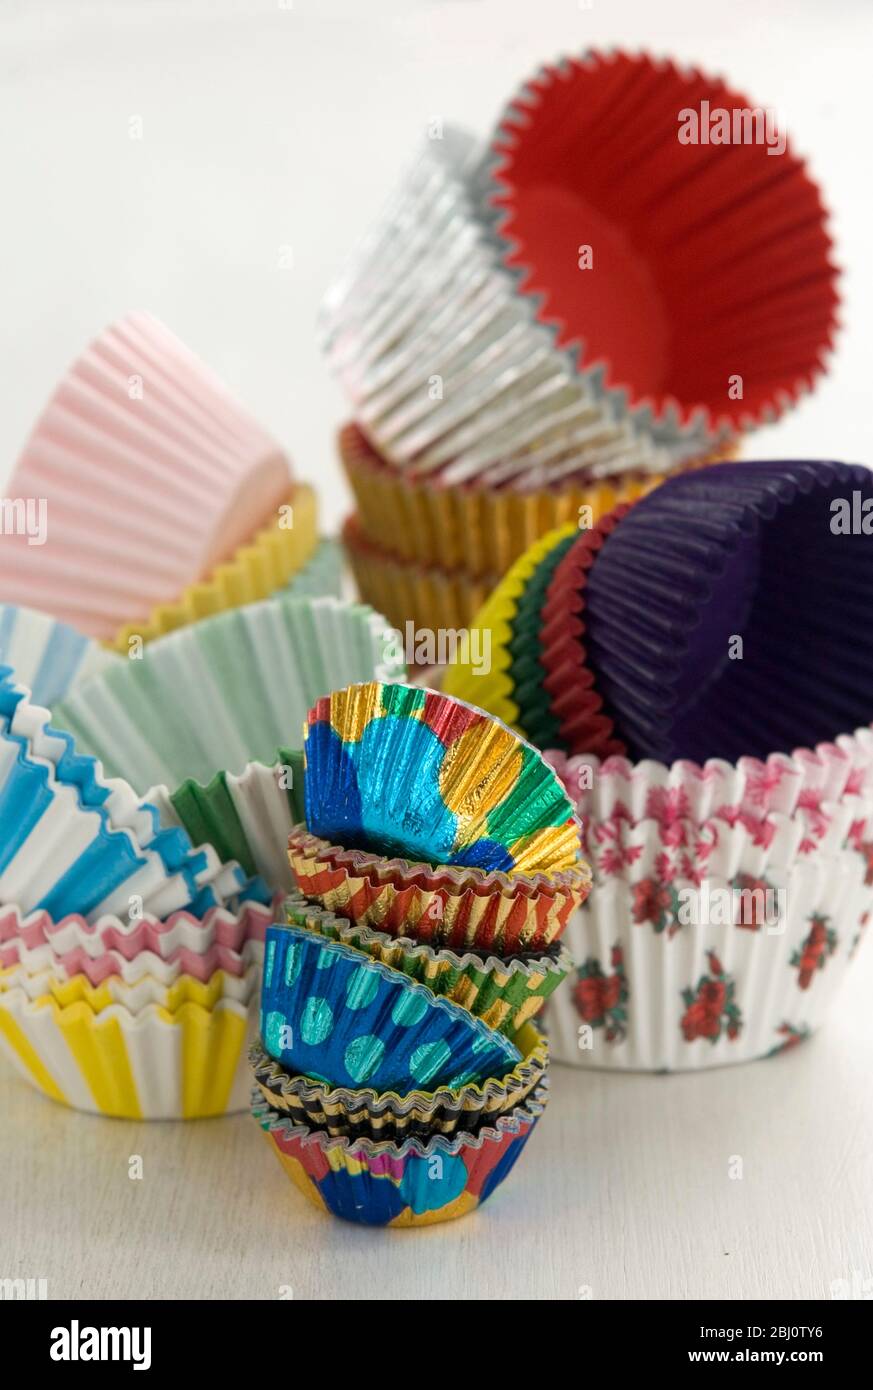 Variety of colourful muffin cases stacked high - Stock Photo